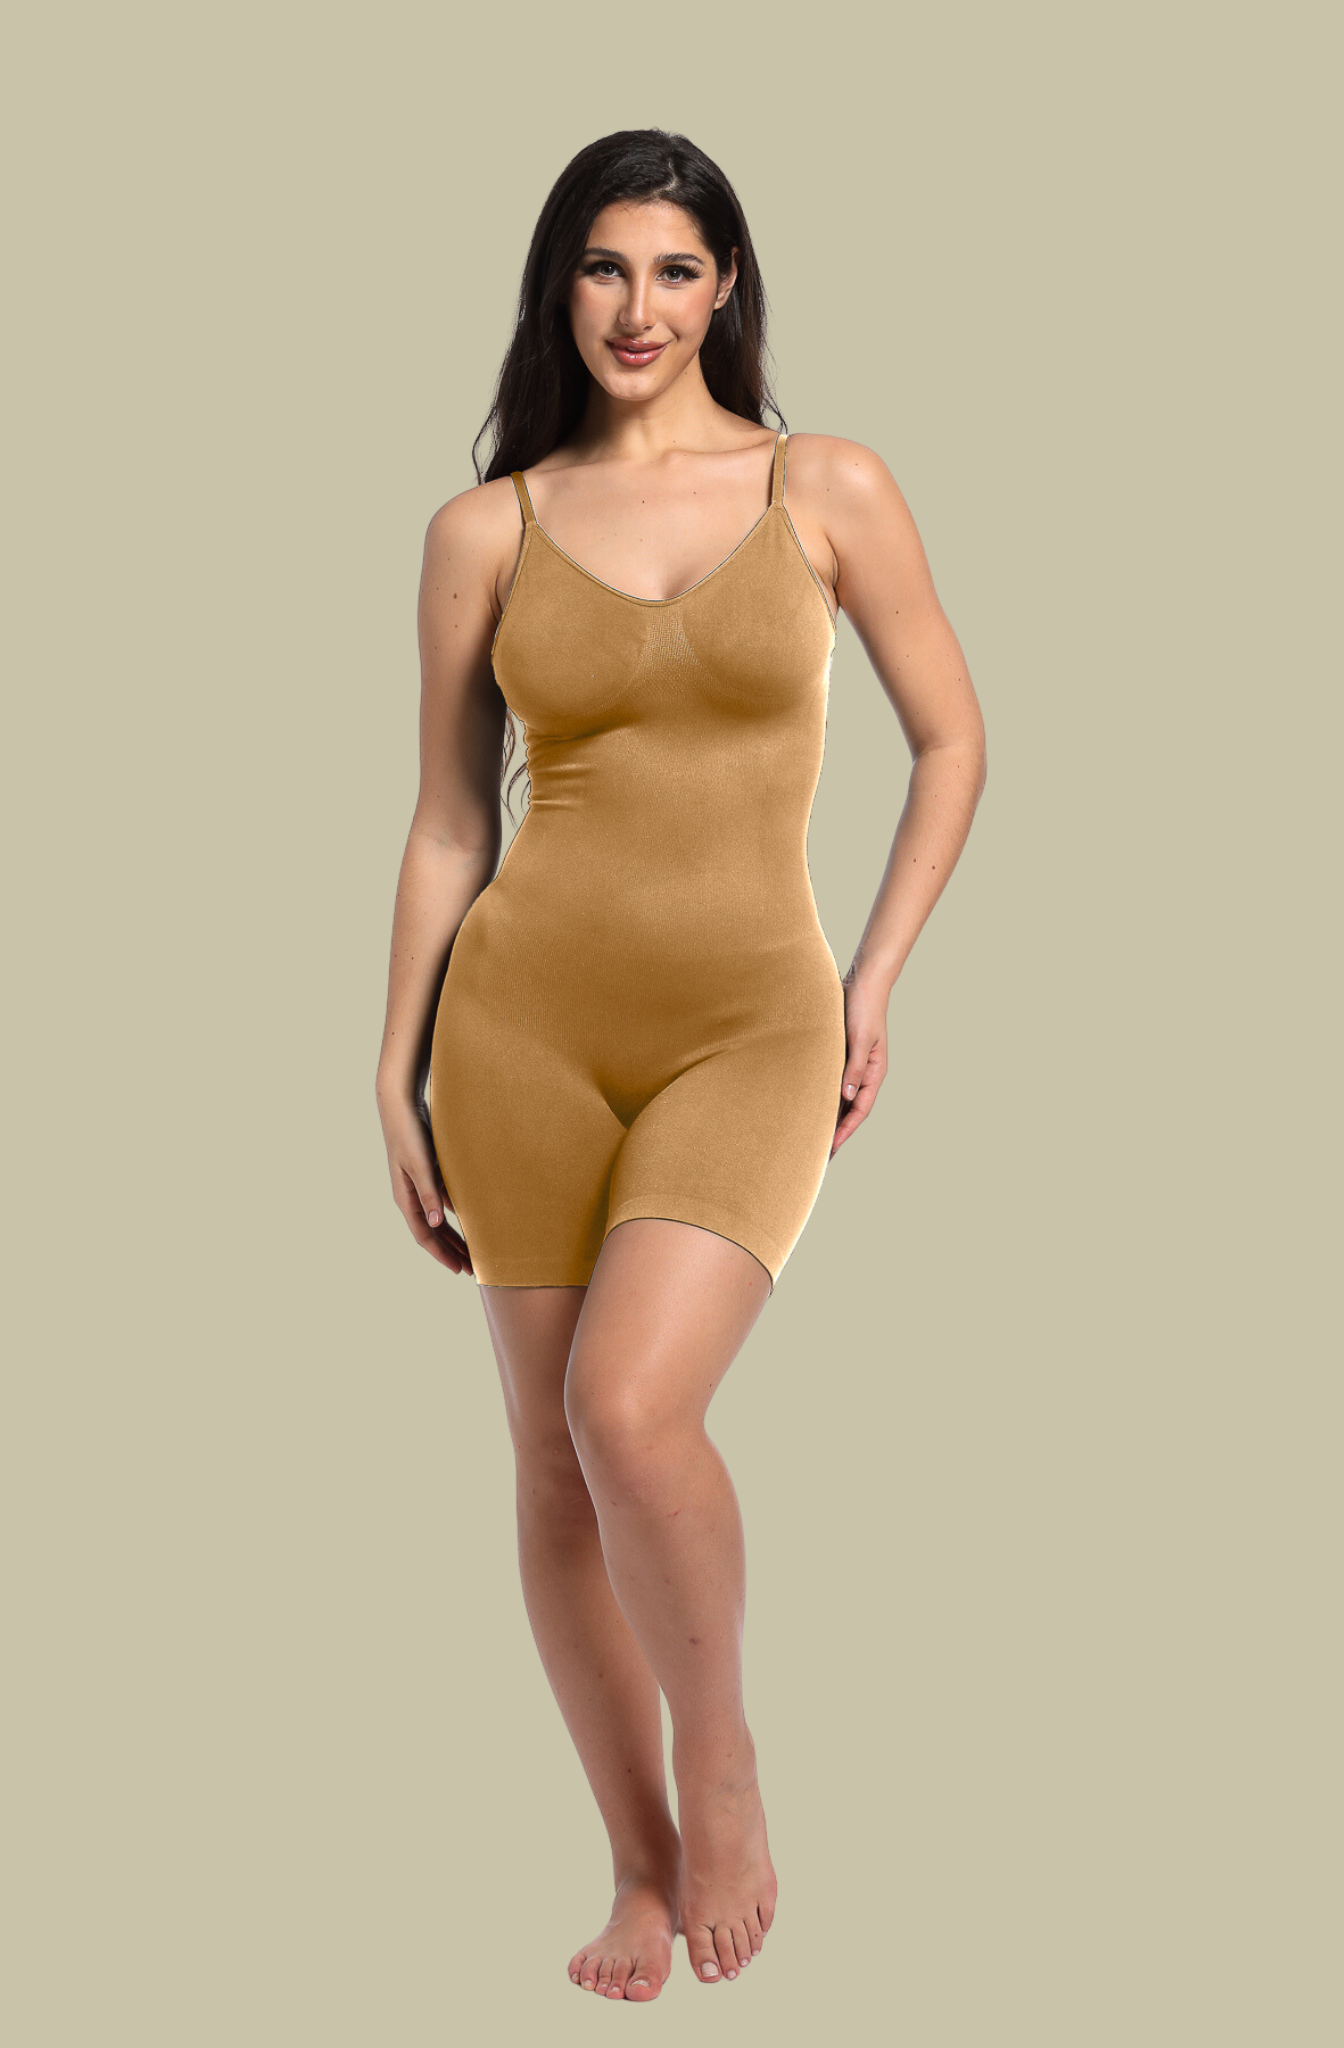 Mr Price - Category is: snatched and sculpted, honey 🙌 Tap to shop our new  range of seamless shapewear or head in-store. 🔍 Beige Shaper Bodysuit:  1713210033 – R149.99 🔍 Nude Shaper